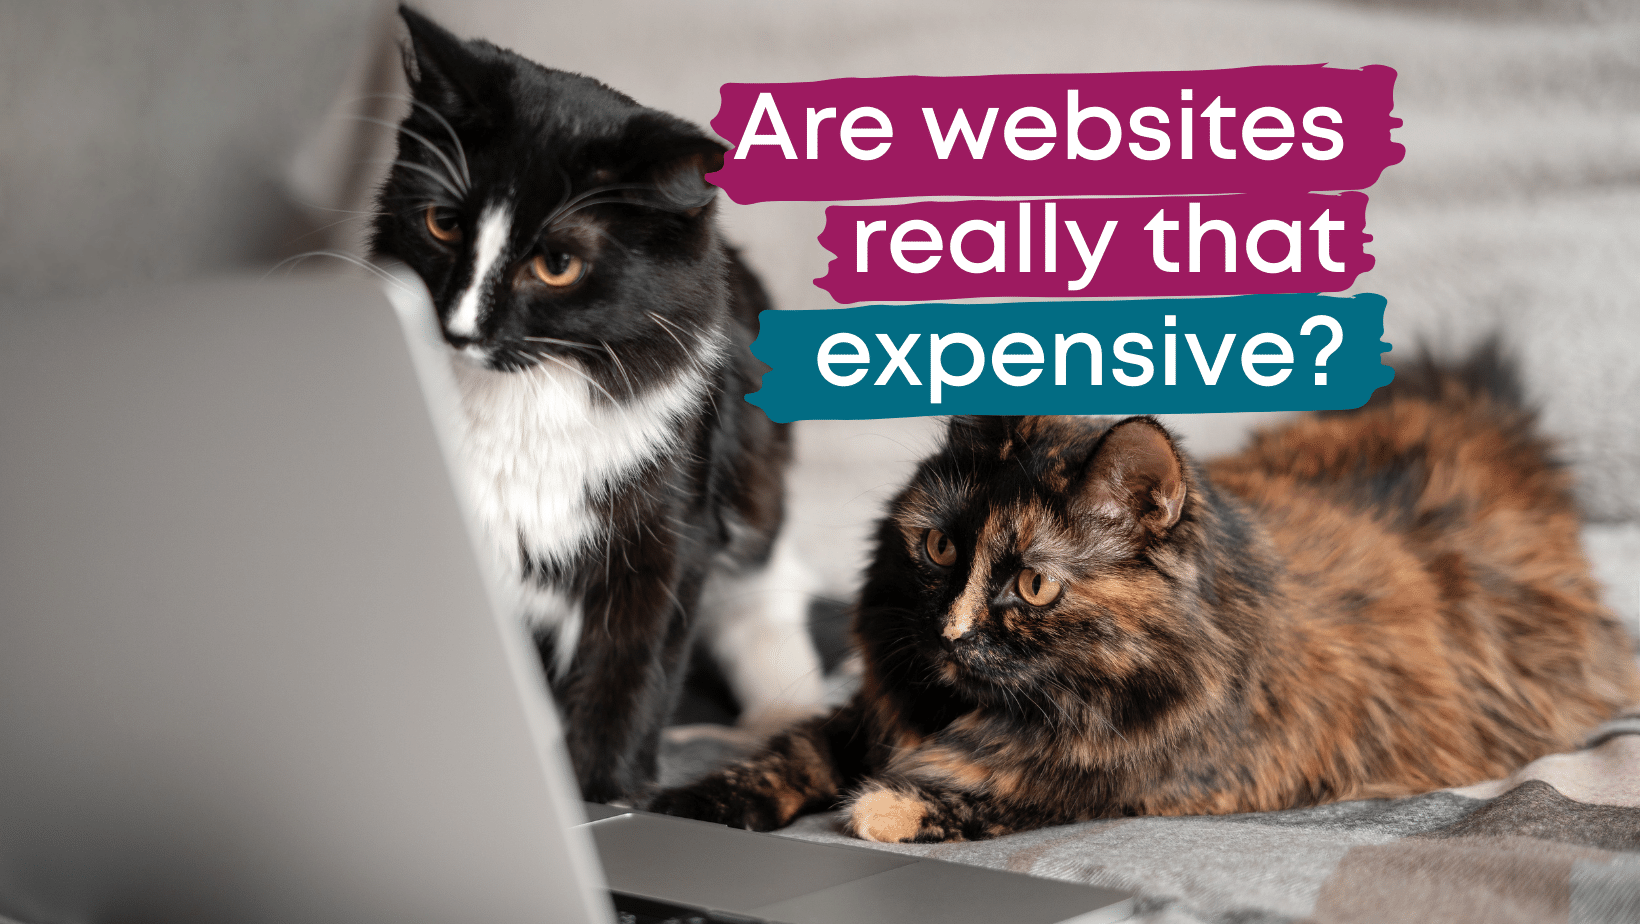 Cats looking at a website on a laptop